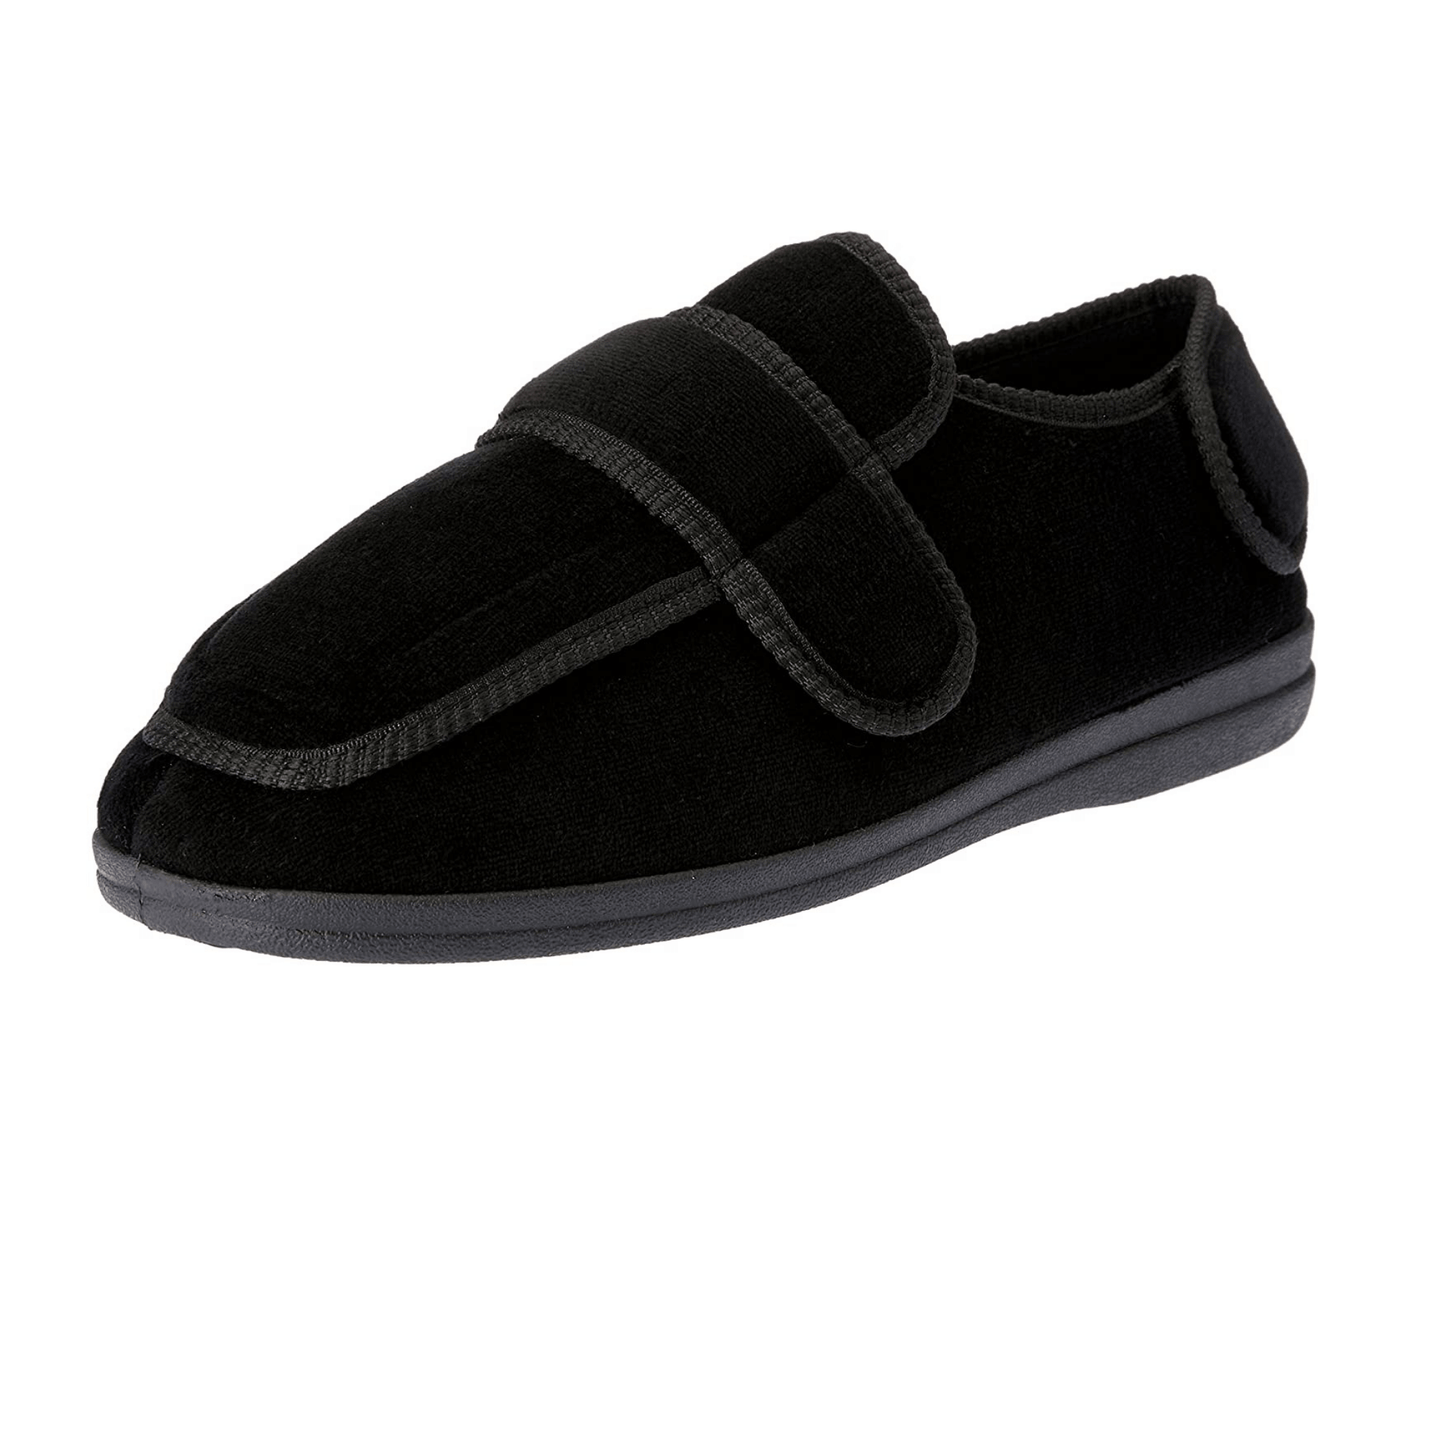 SHOES Men's Francis Slipper - Caring Clothing